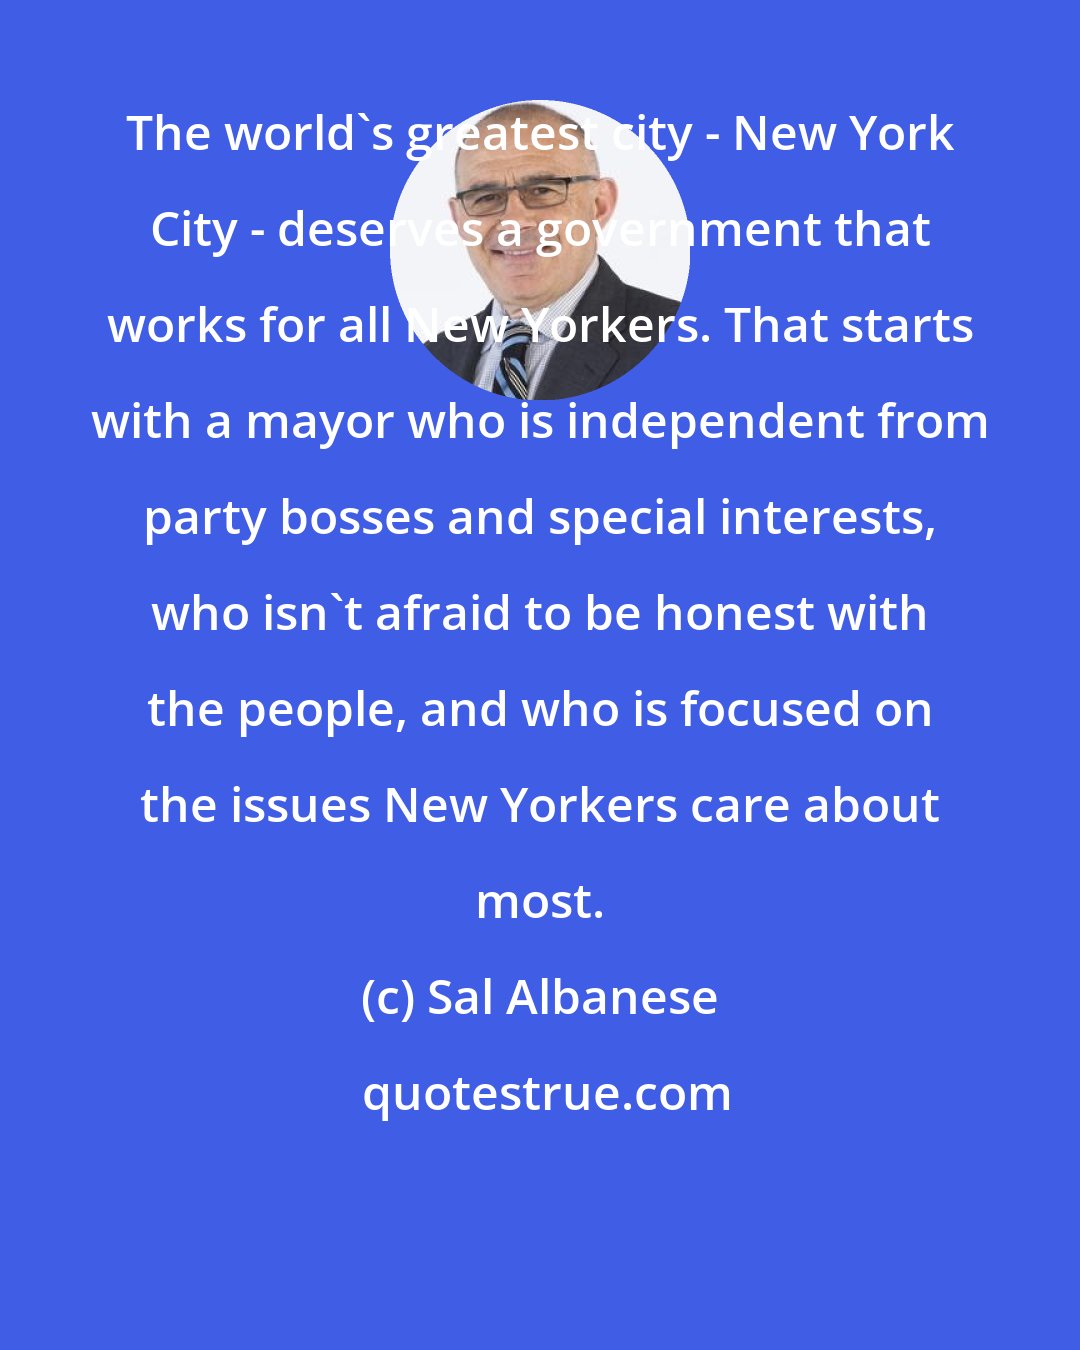 Sal Albanese: The world's greatest city - New York City - deserves a government that works for all New Yorkers. That starts with a mayor who is independent from party bosses and special interests, who isn't afraid to be honest with the people, and who is focused on the issues New Yorkers care about most.